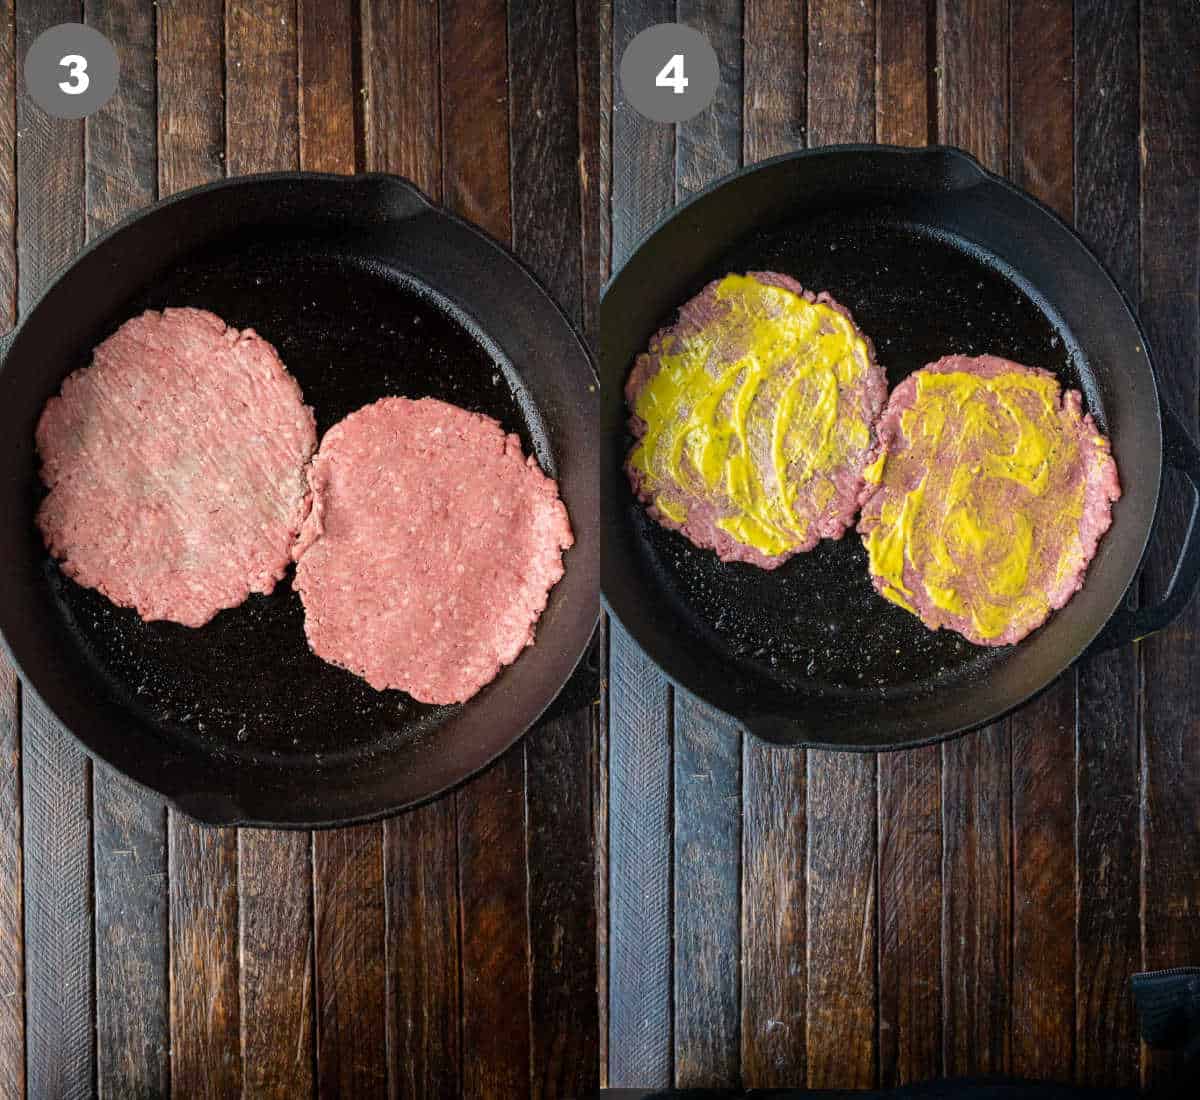 Ground beef patties placed in a hot skillet with mustard placed on top.